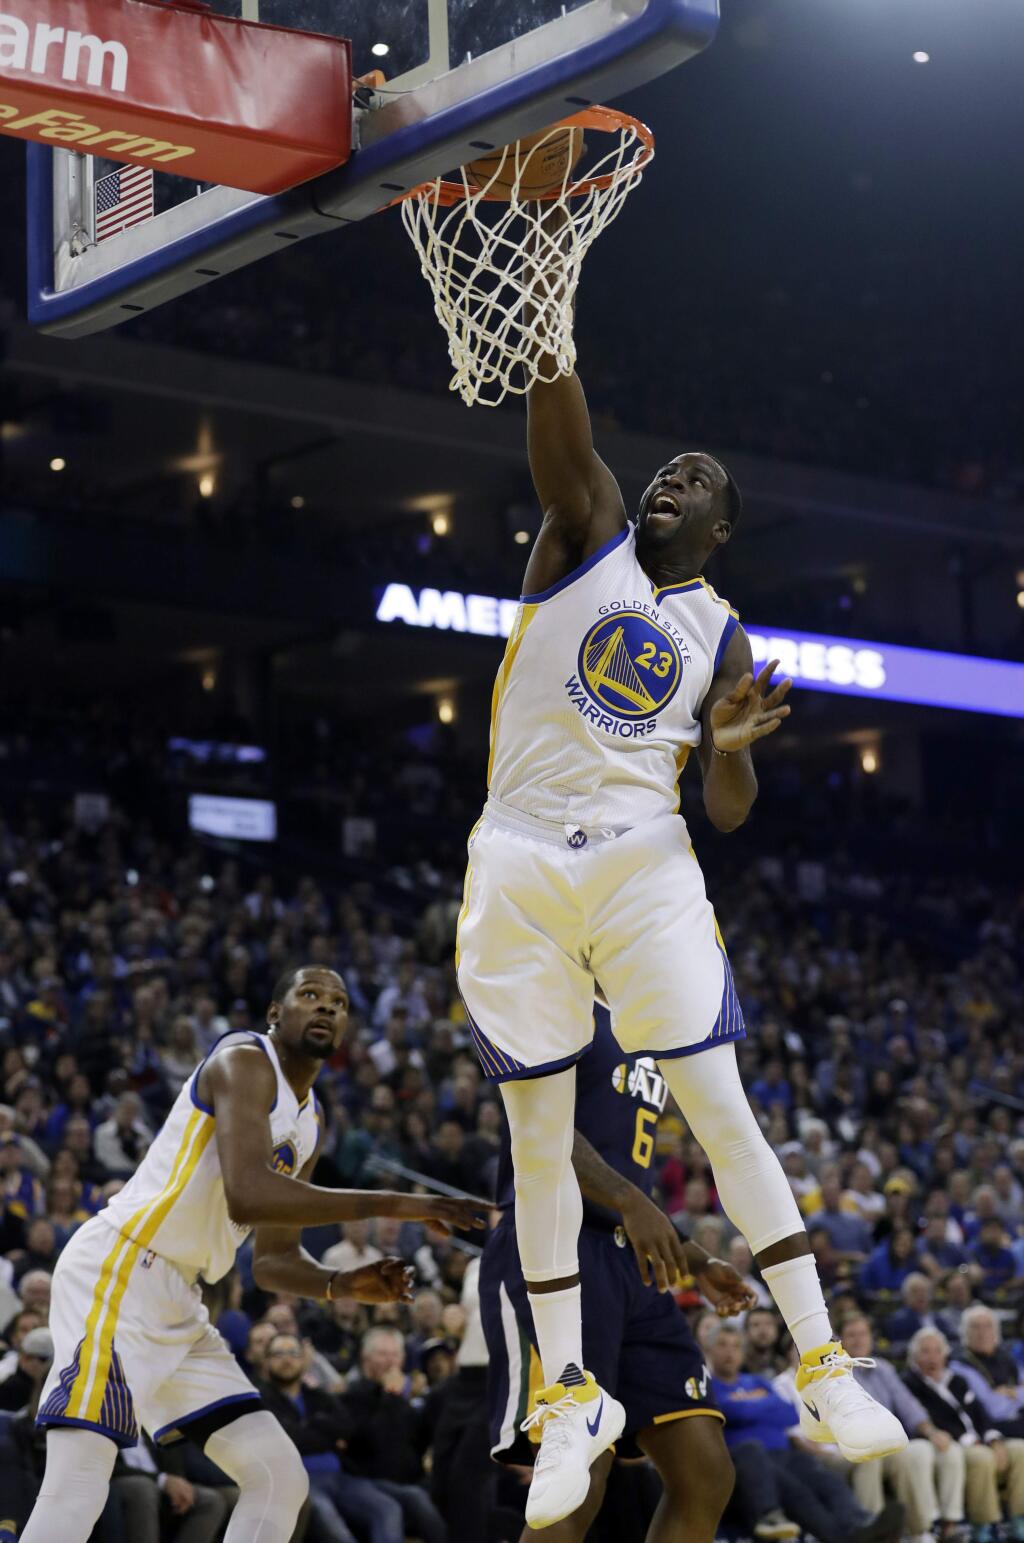 Golden State Warriors forward Draymond Green (23) dunks against the Utah Jazz during the first half of an NBA basketball game Monday, April 10, 2017, in Oakland, Calif. (AP Photo/Marcio Jose Sanchez)